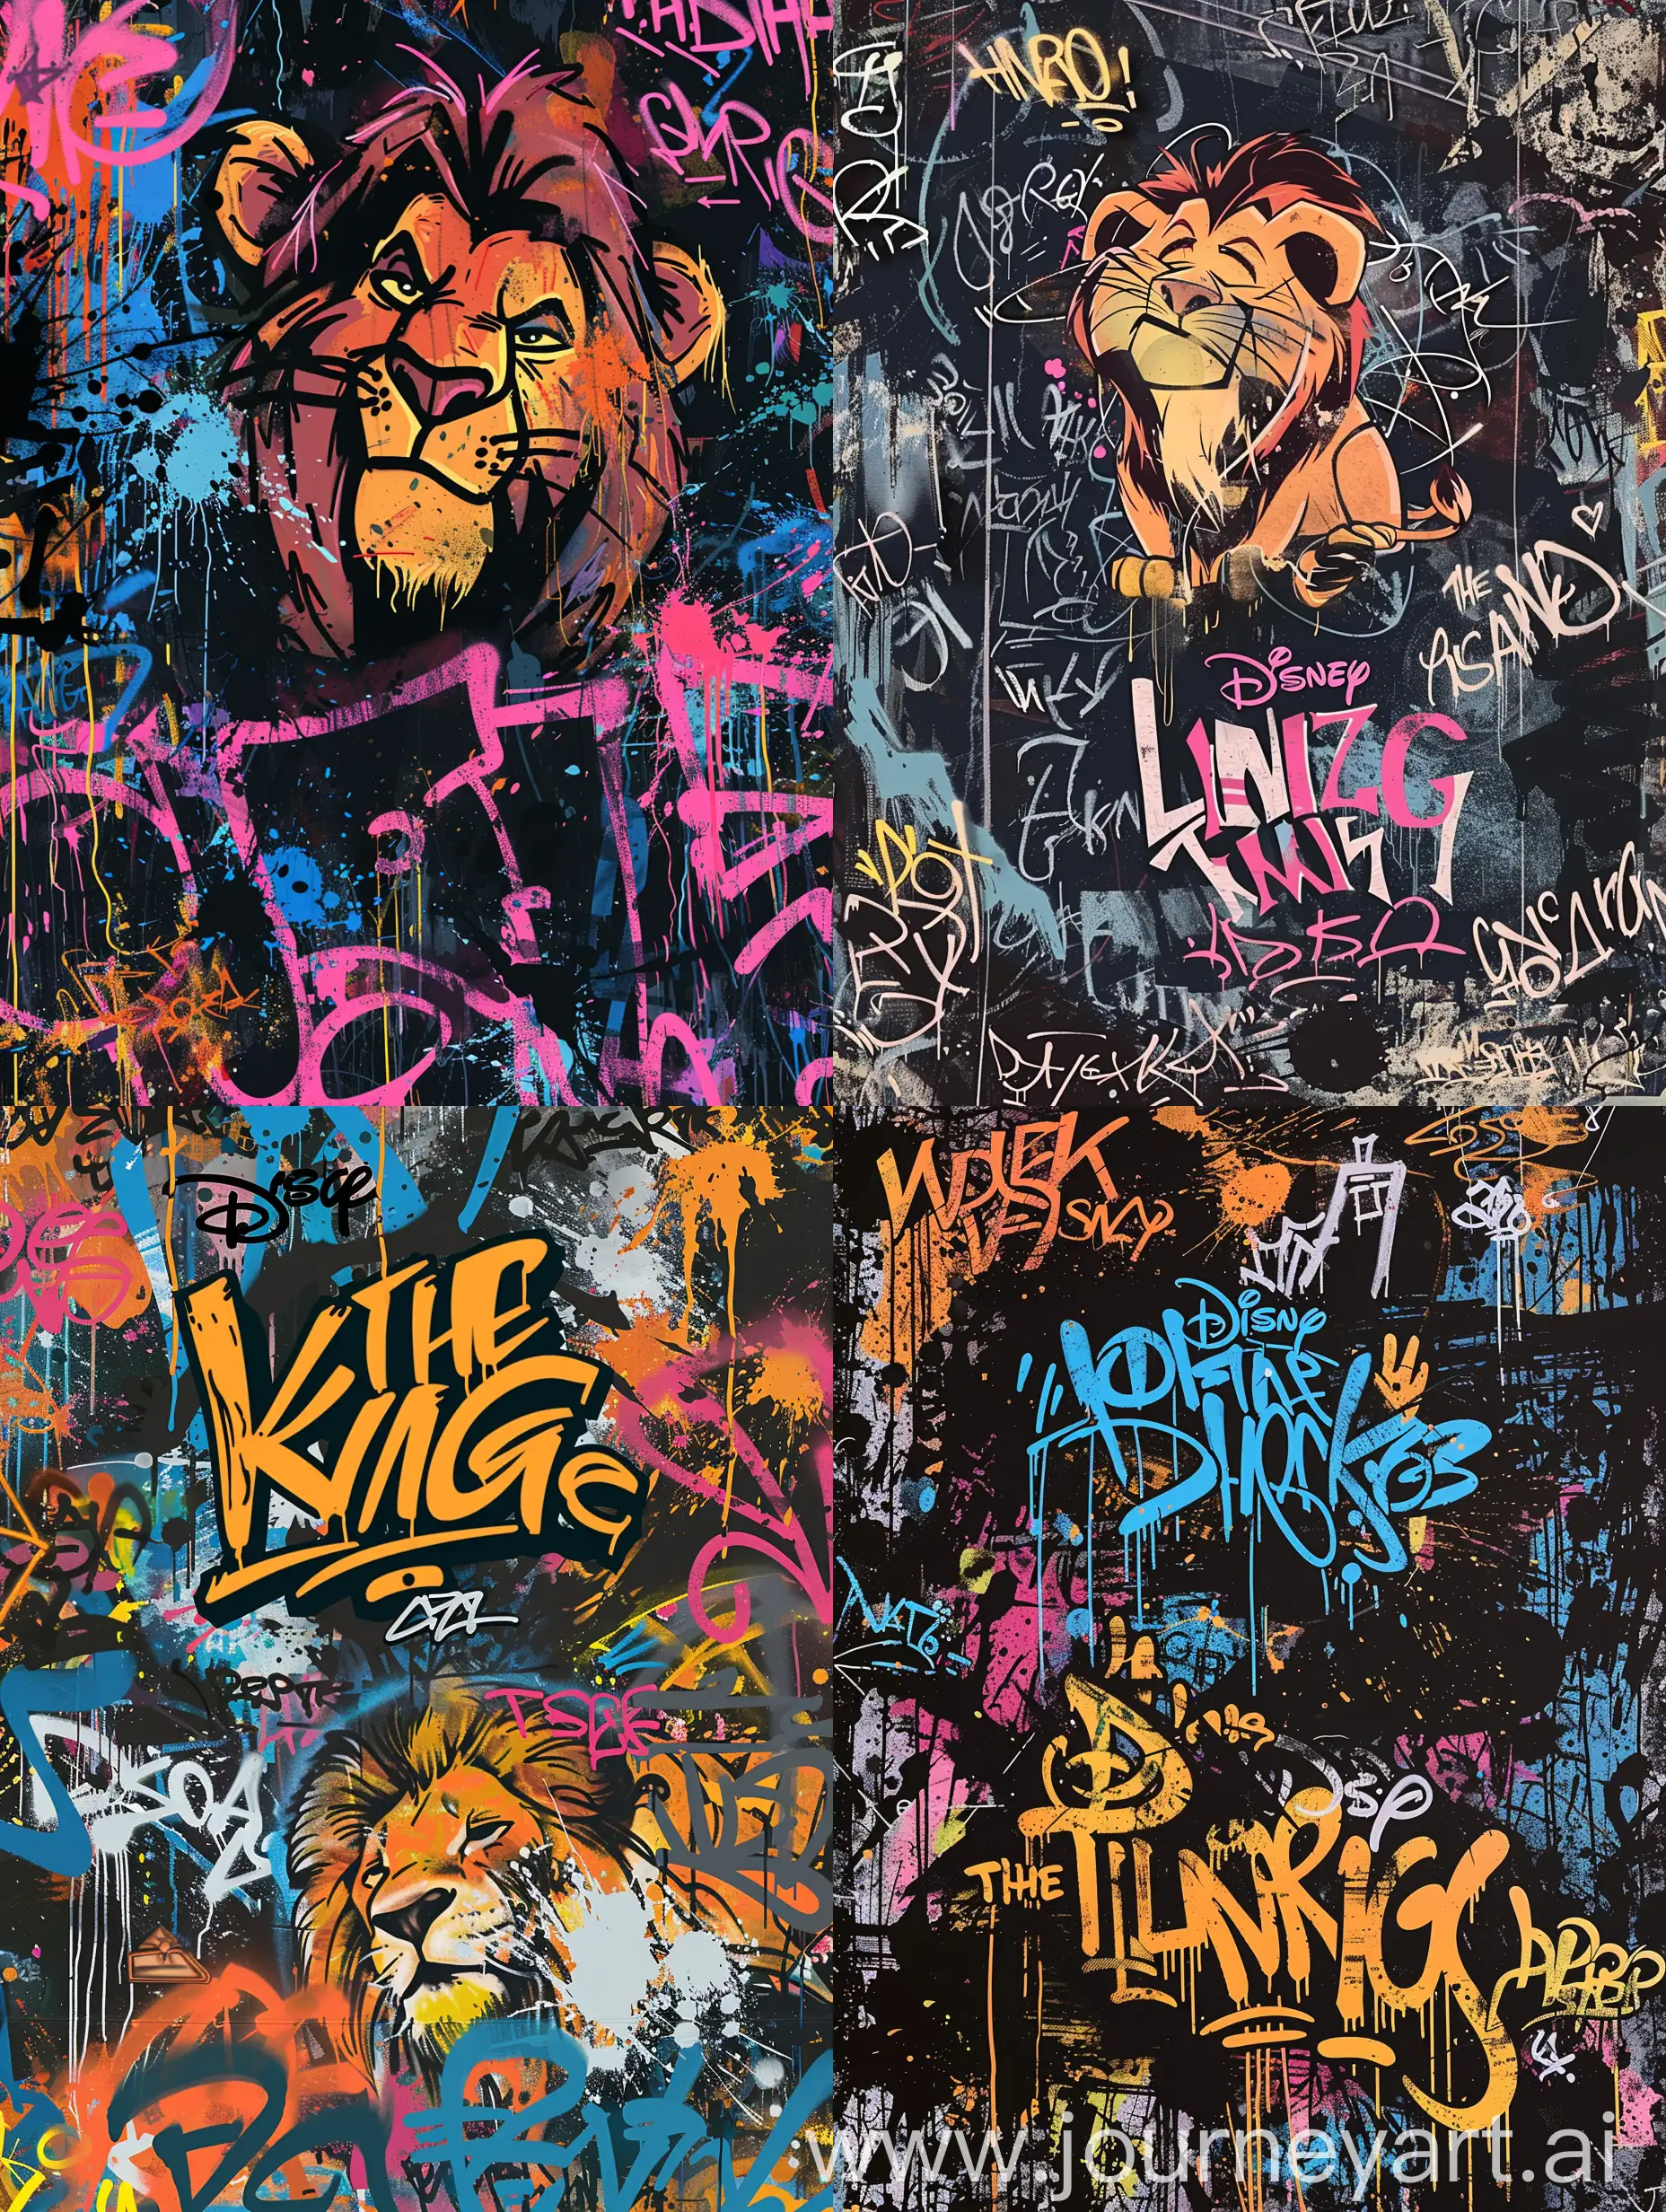 flat illustration graffiti on cava:2, illustration of The lion king by disney, detailed, tag, background full of dark paint splash and graffiti text, random sized graffiti text all over typography:2, urban, canva texture, text 